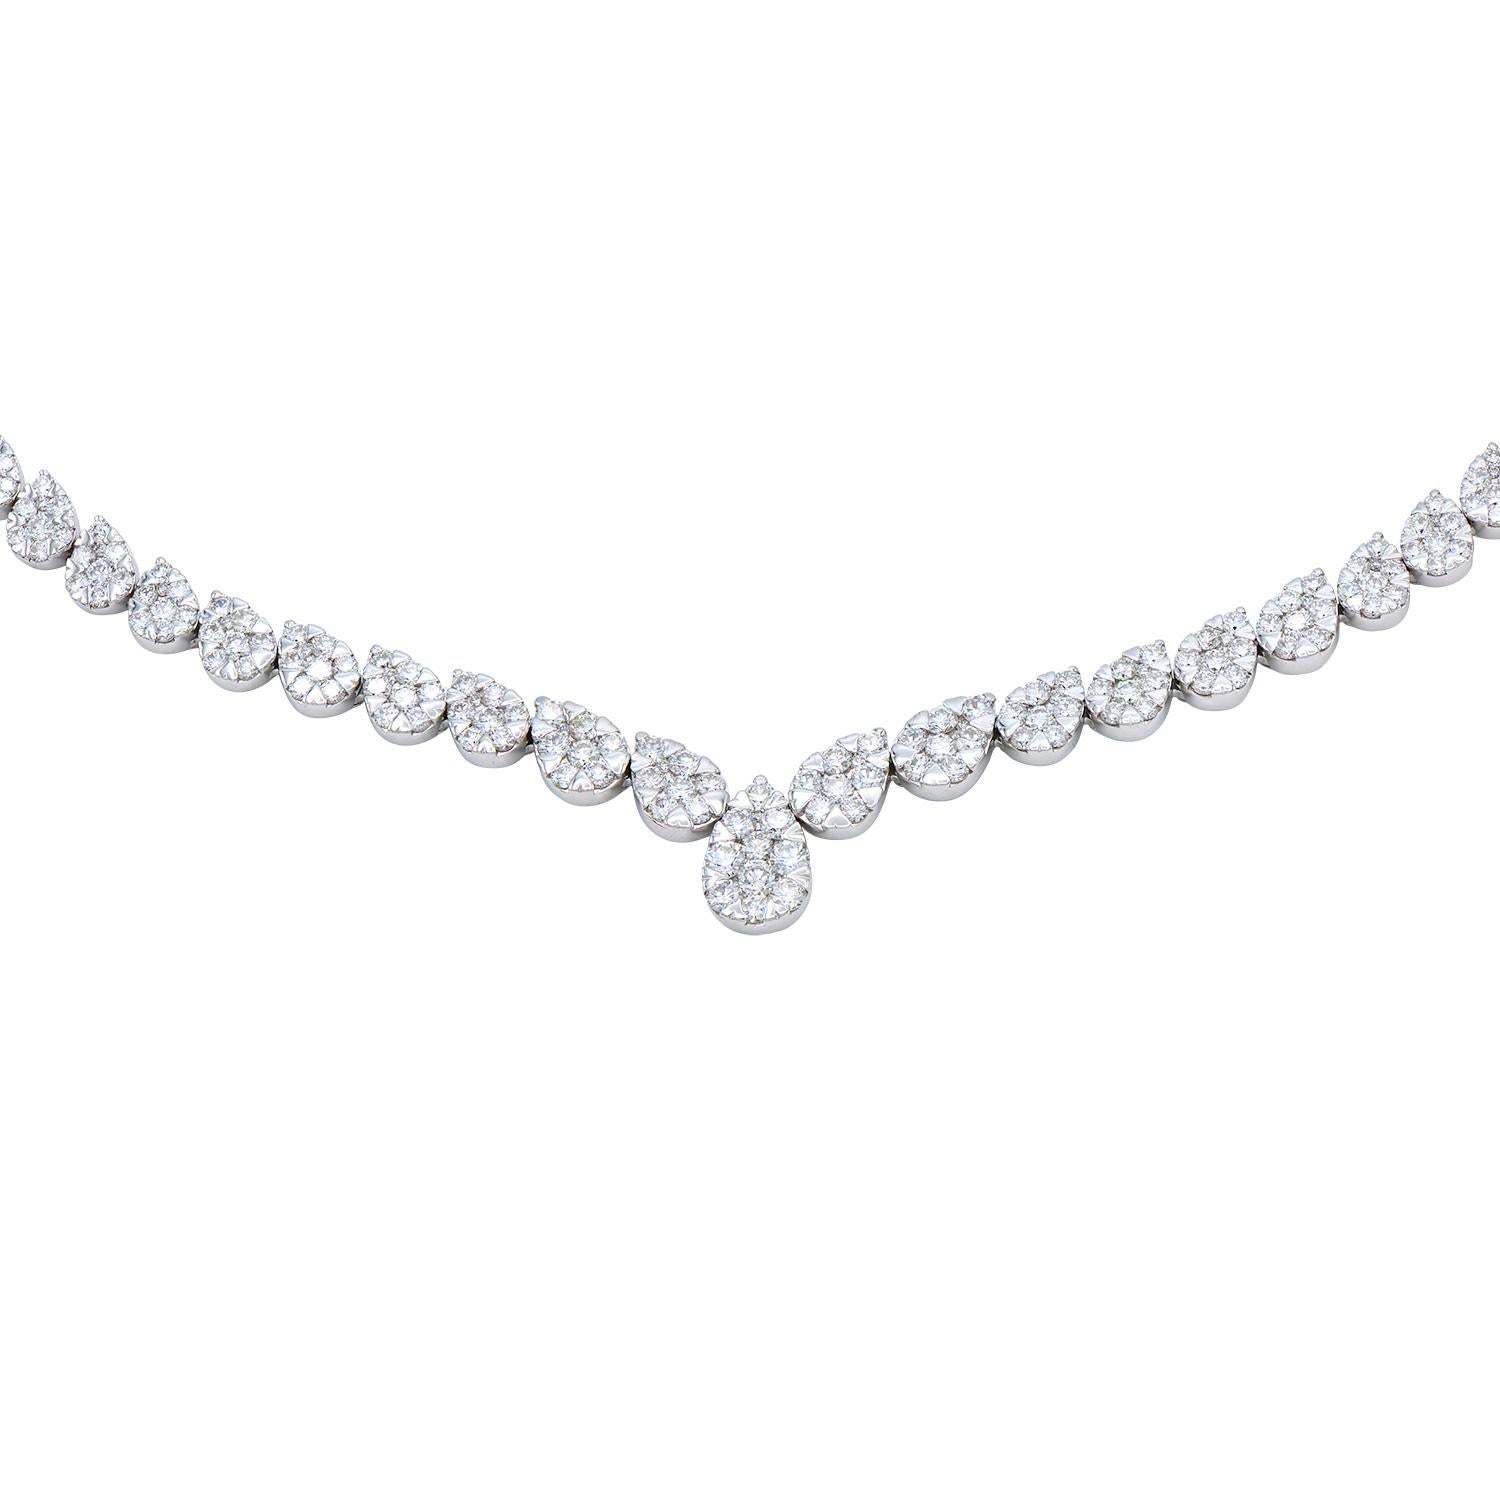 This stunning necklace is made from 203 round sparkling VS2, G color diamonds that are formed together in pear shapes. The pears are lined up on an angle making a 